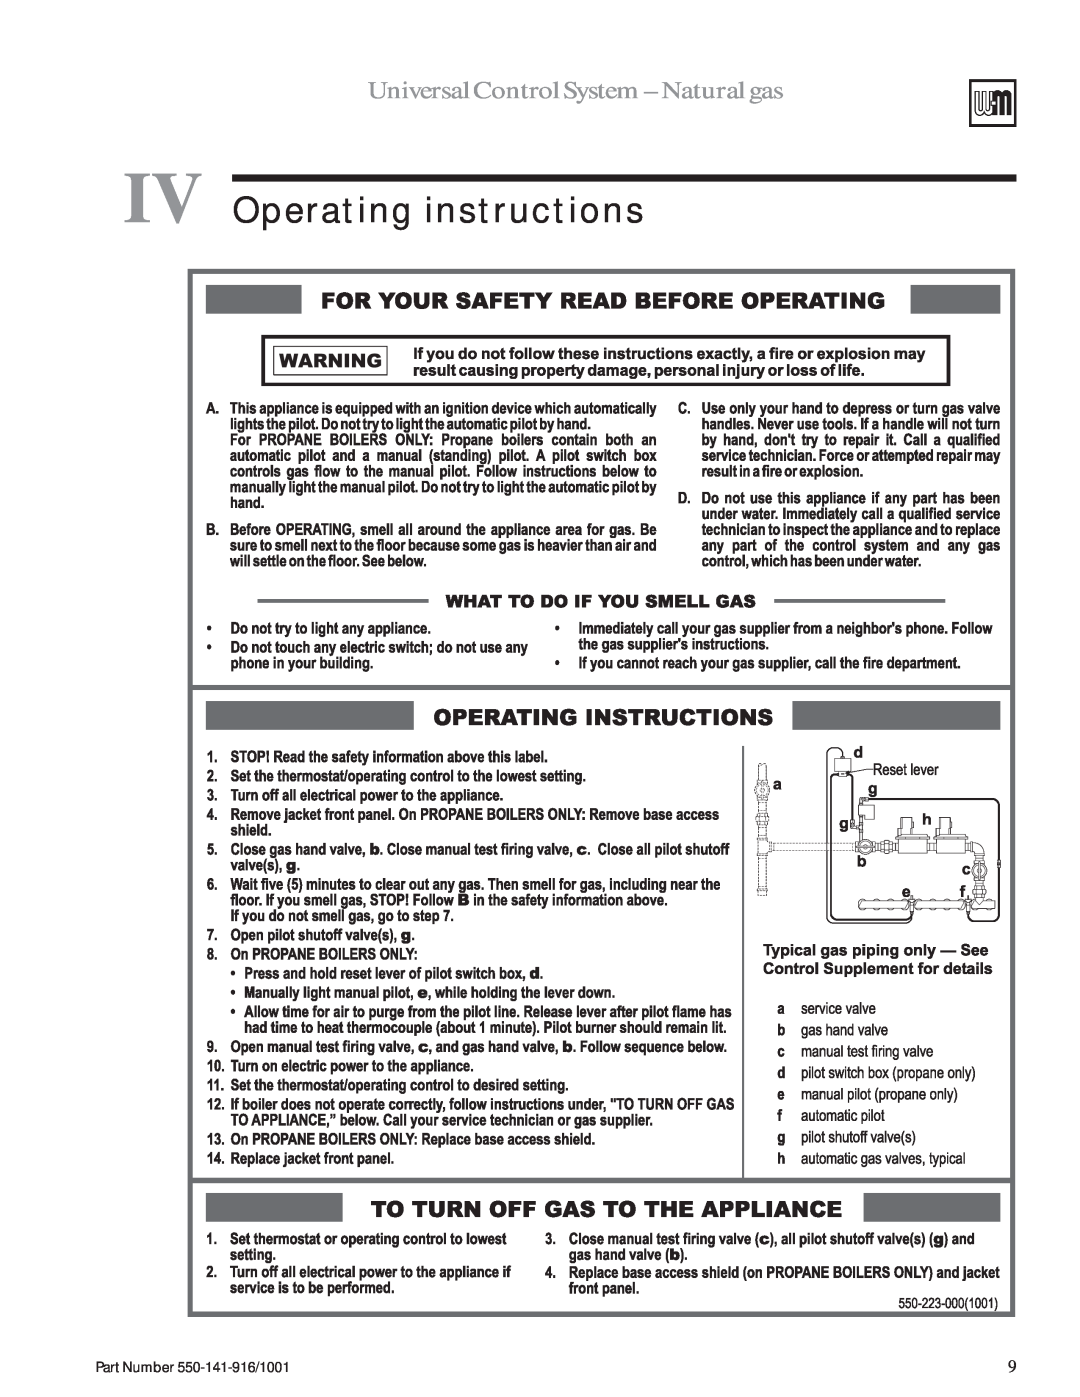 Weil-McLain LGB-23 manual IV Operating instructions, Universal Control System - Natural gas, Part Number 550-141-916/1001 